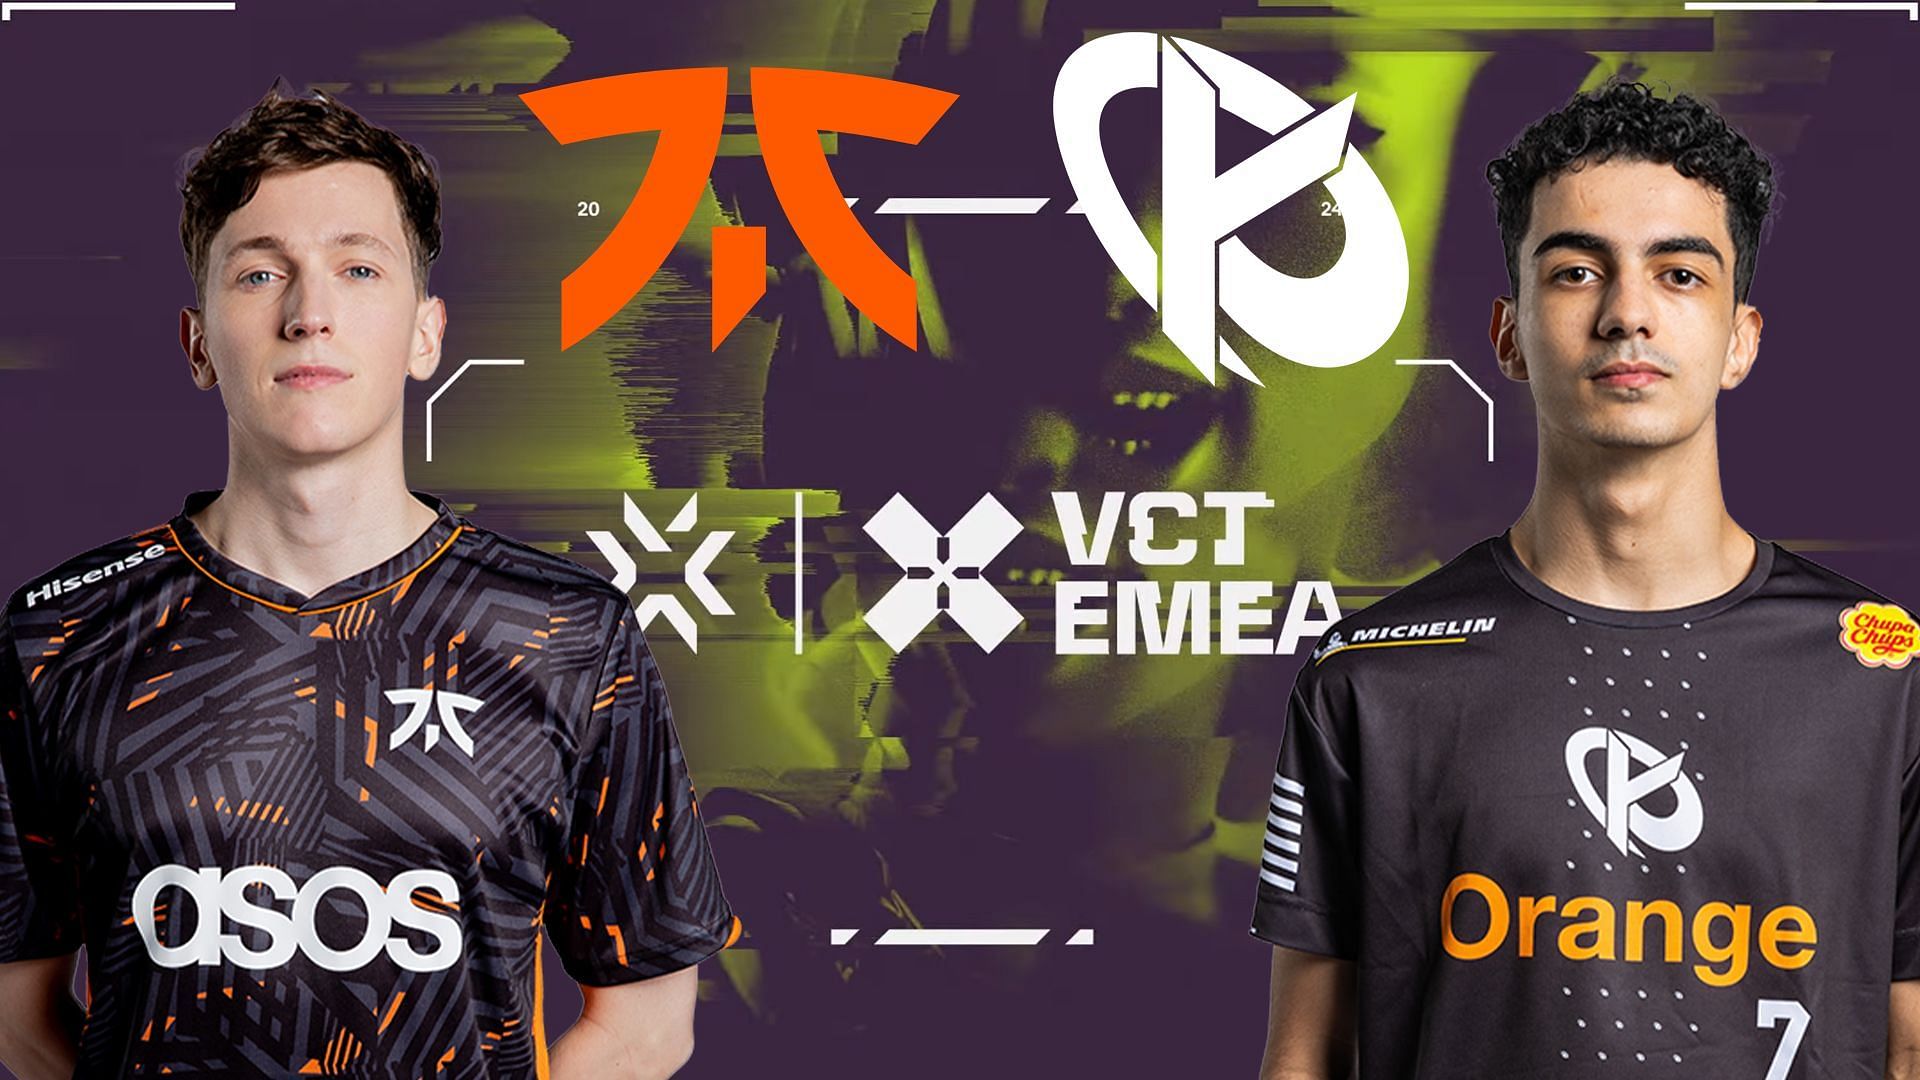 Fnatic vs Karmine Corp at VCT EMEA Kickoff (Image via Riot Games, Fnatic and Karmine Corp)